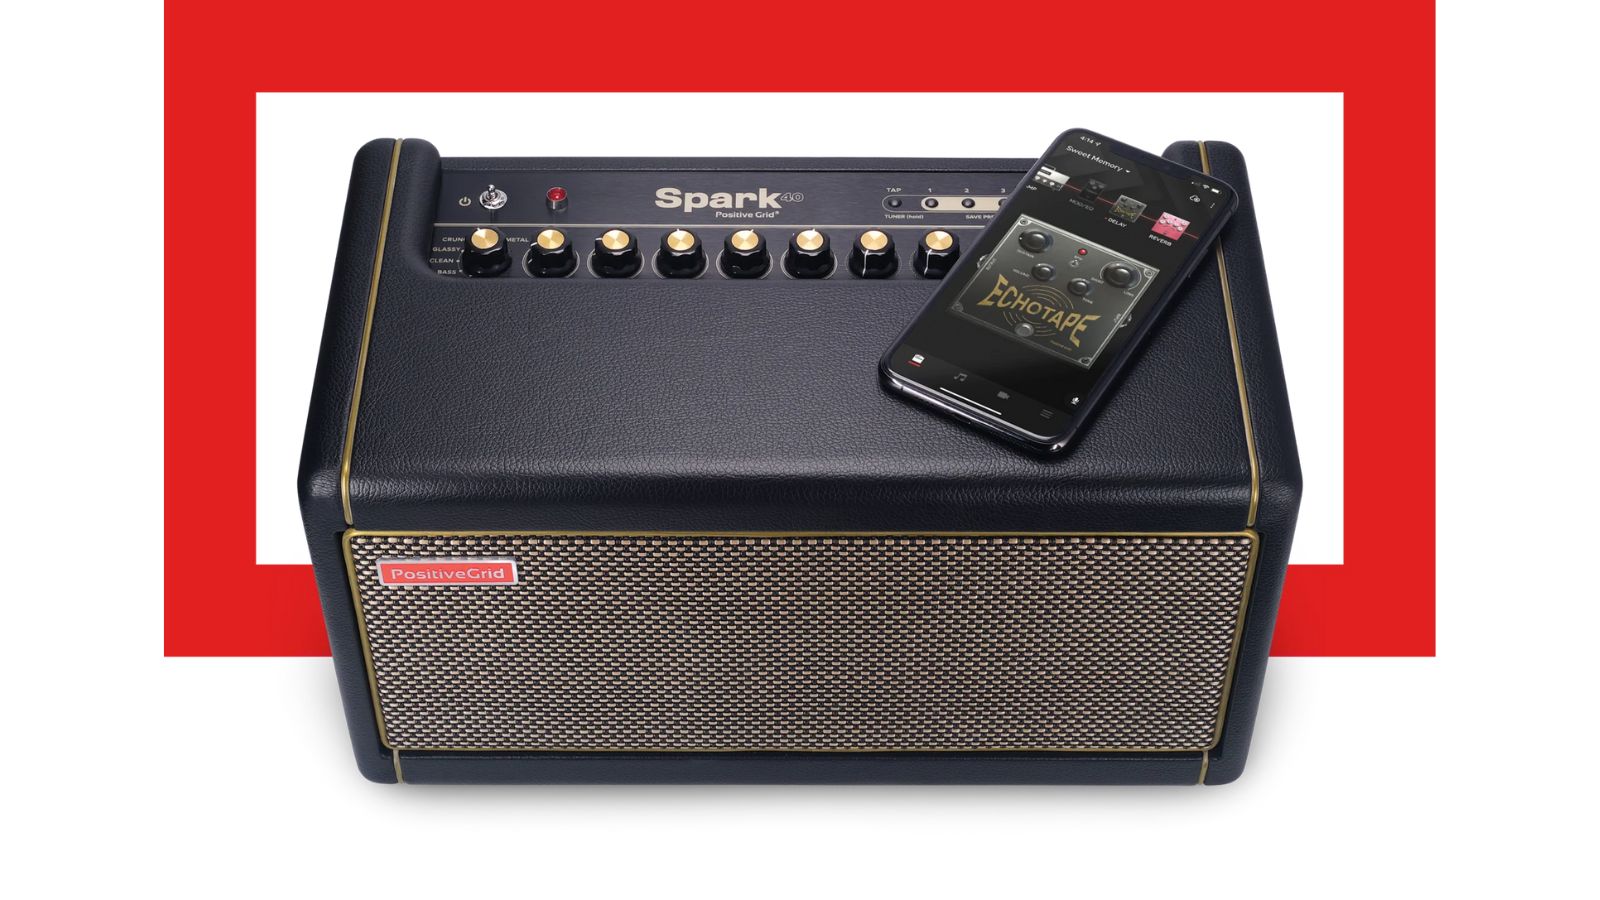 Positive Grid Spark Amplifier Review - American Songwriter